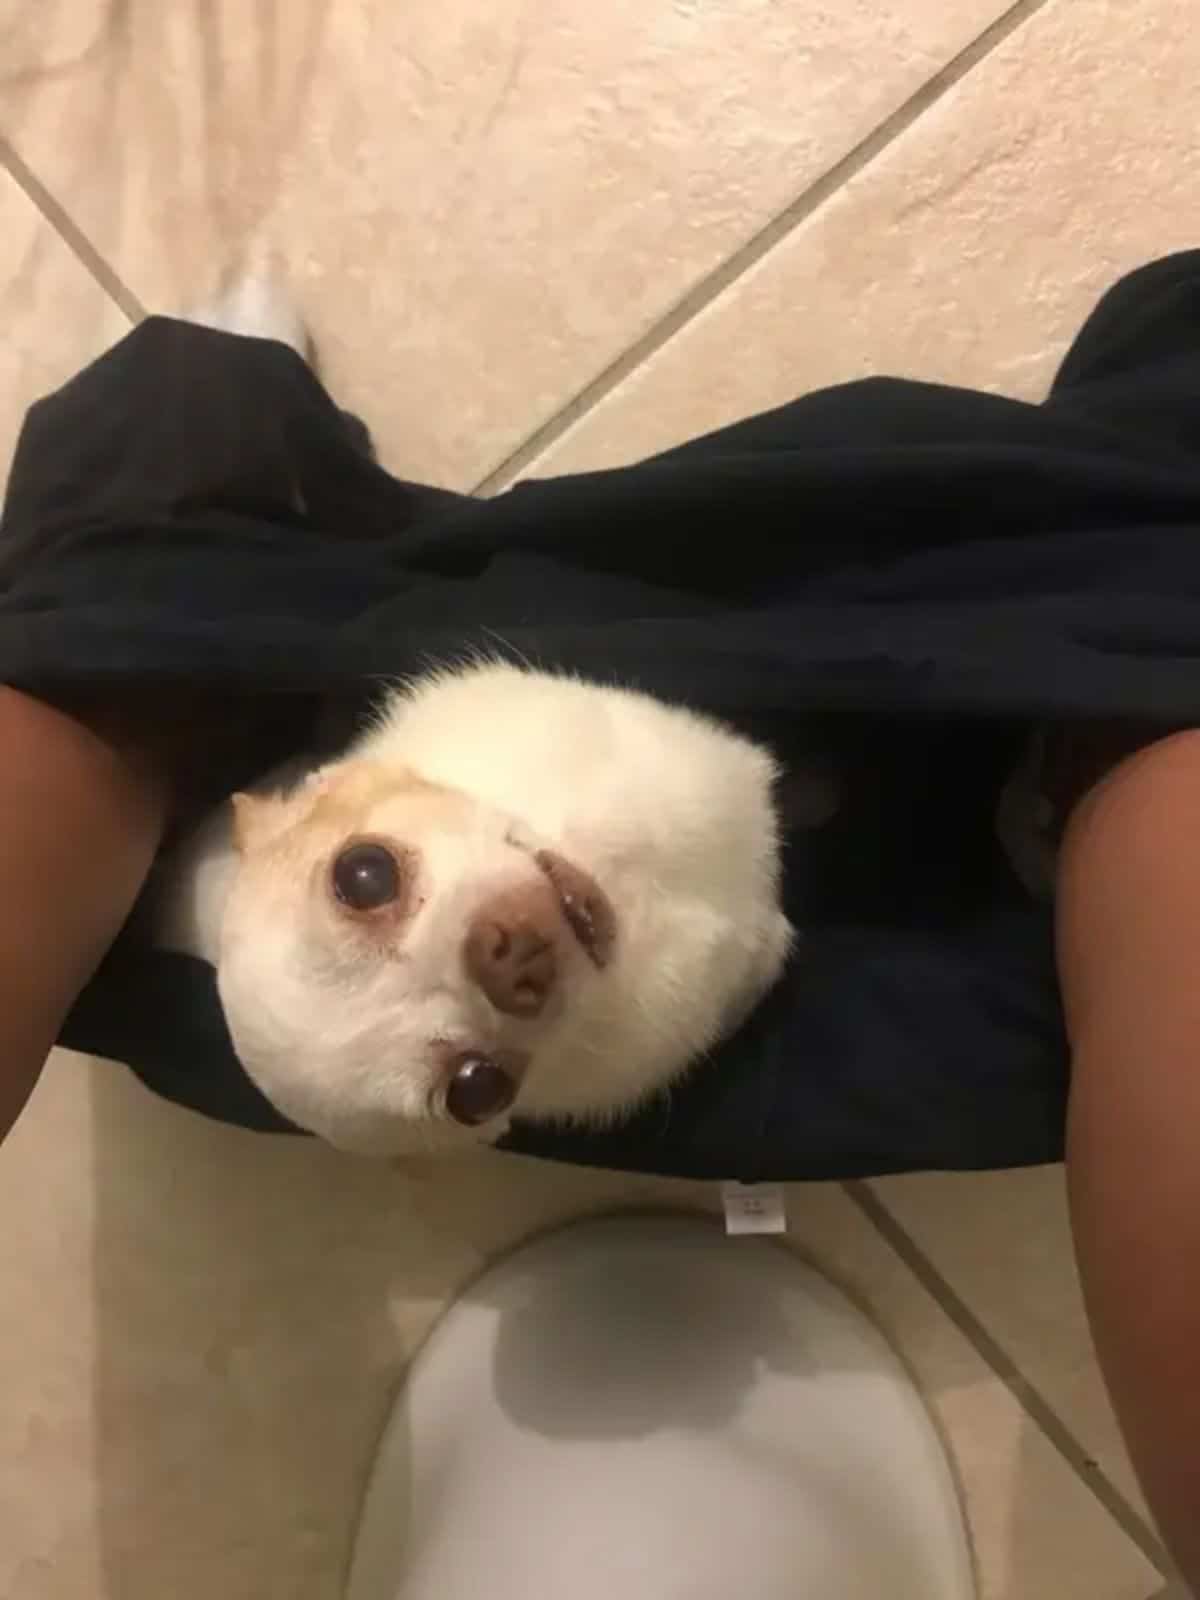 white chihuahua sitting inside someone's pulled down black pants while on the toilet and the dog is looking up